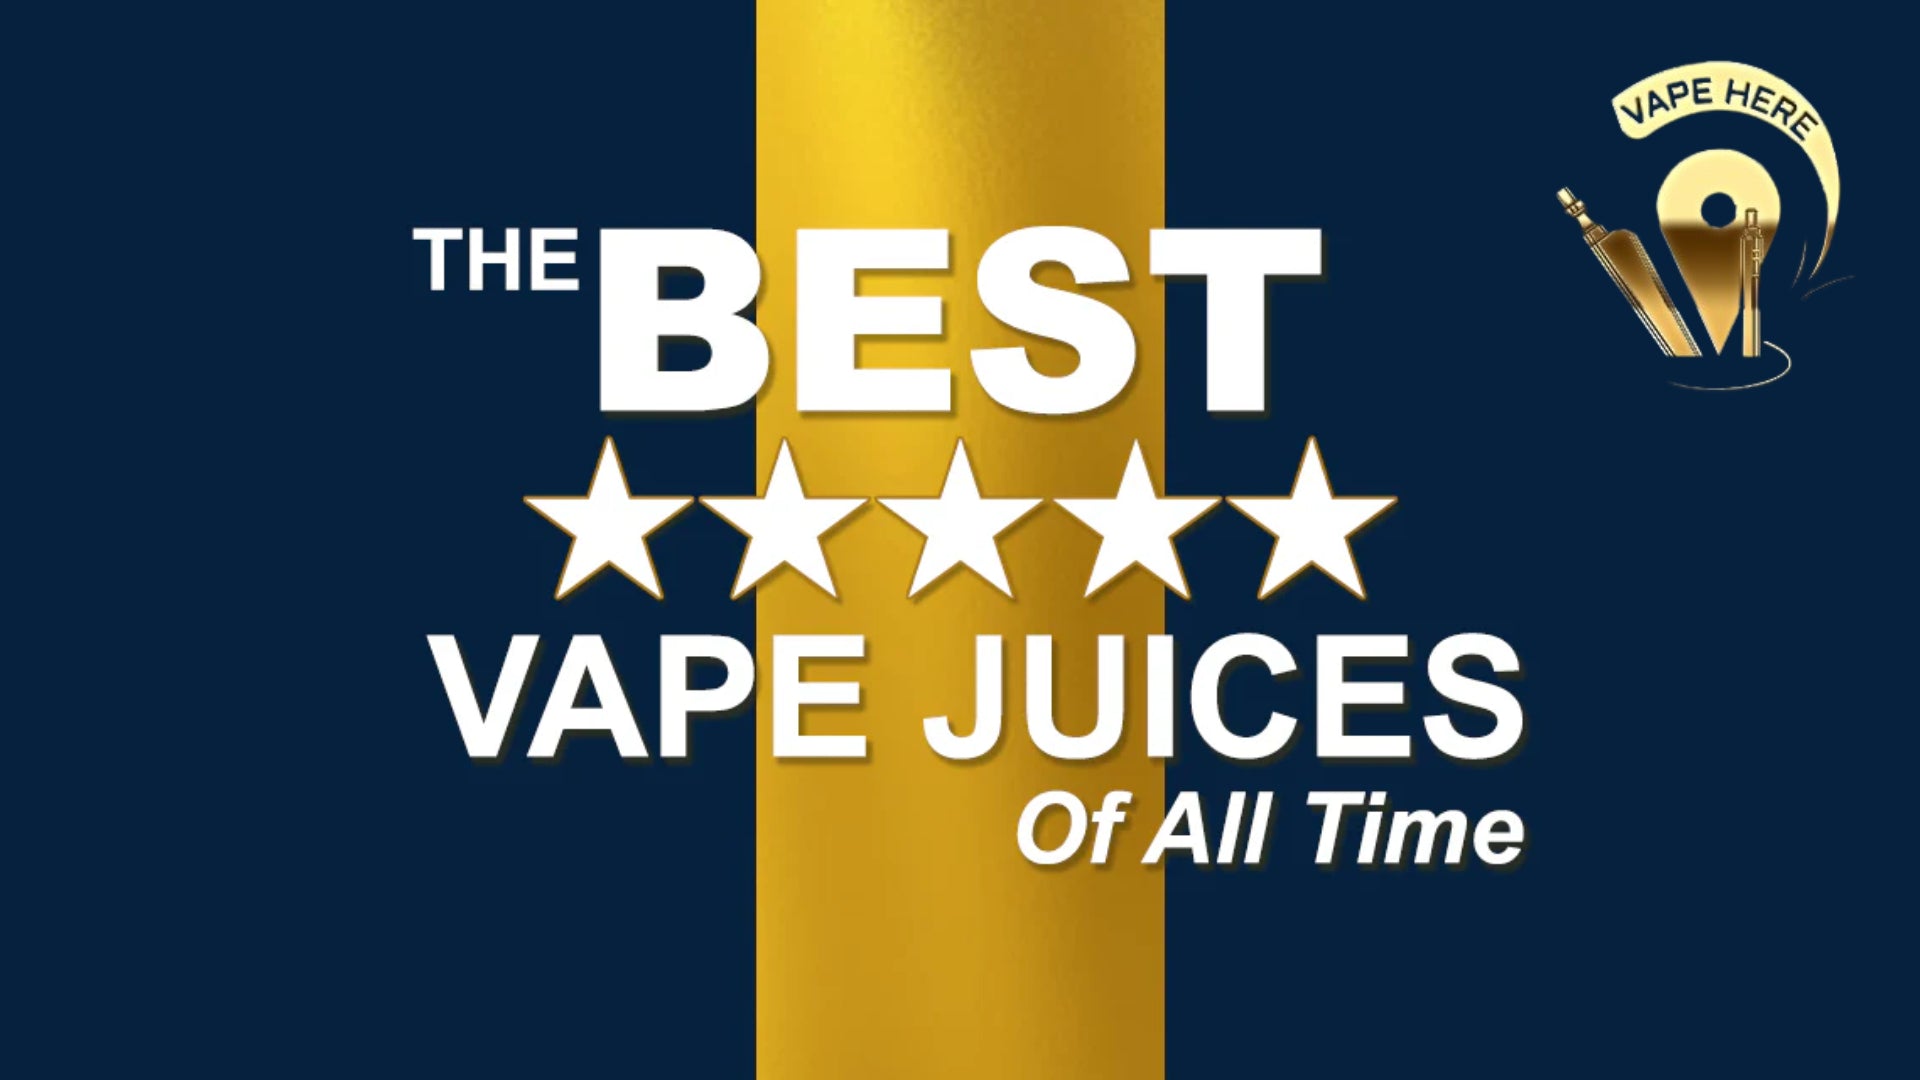 best vape juice and flavors in dubai and Abu dhabi